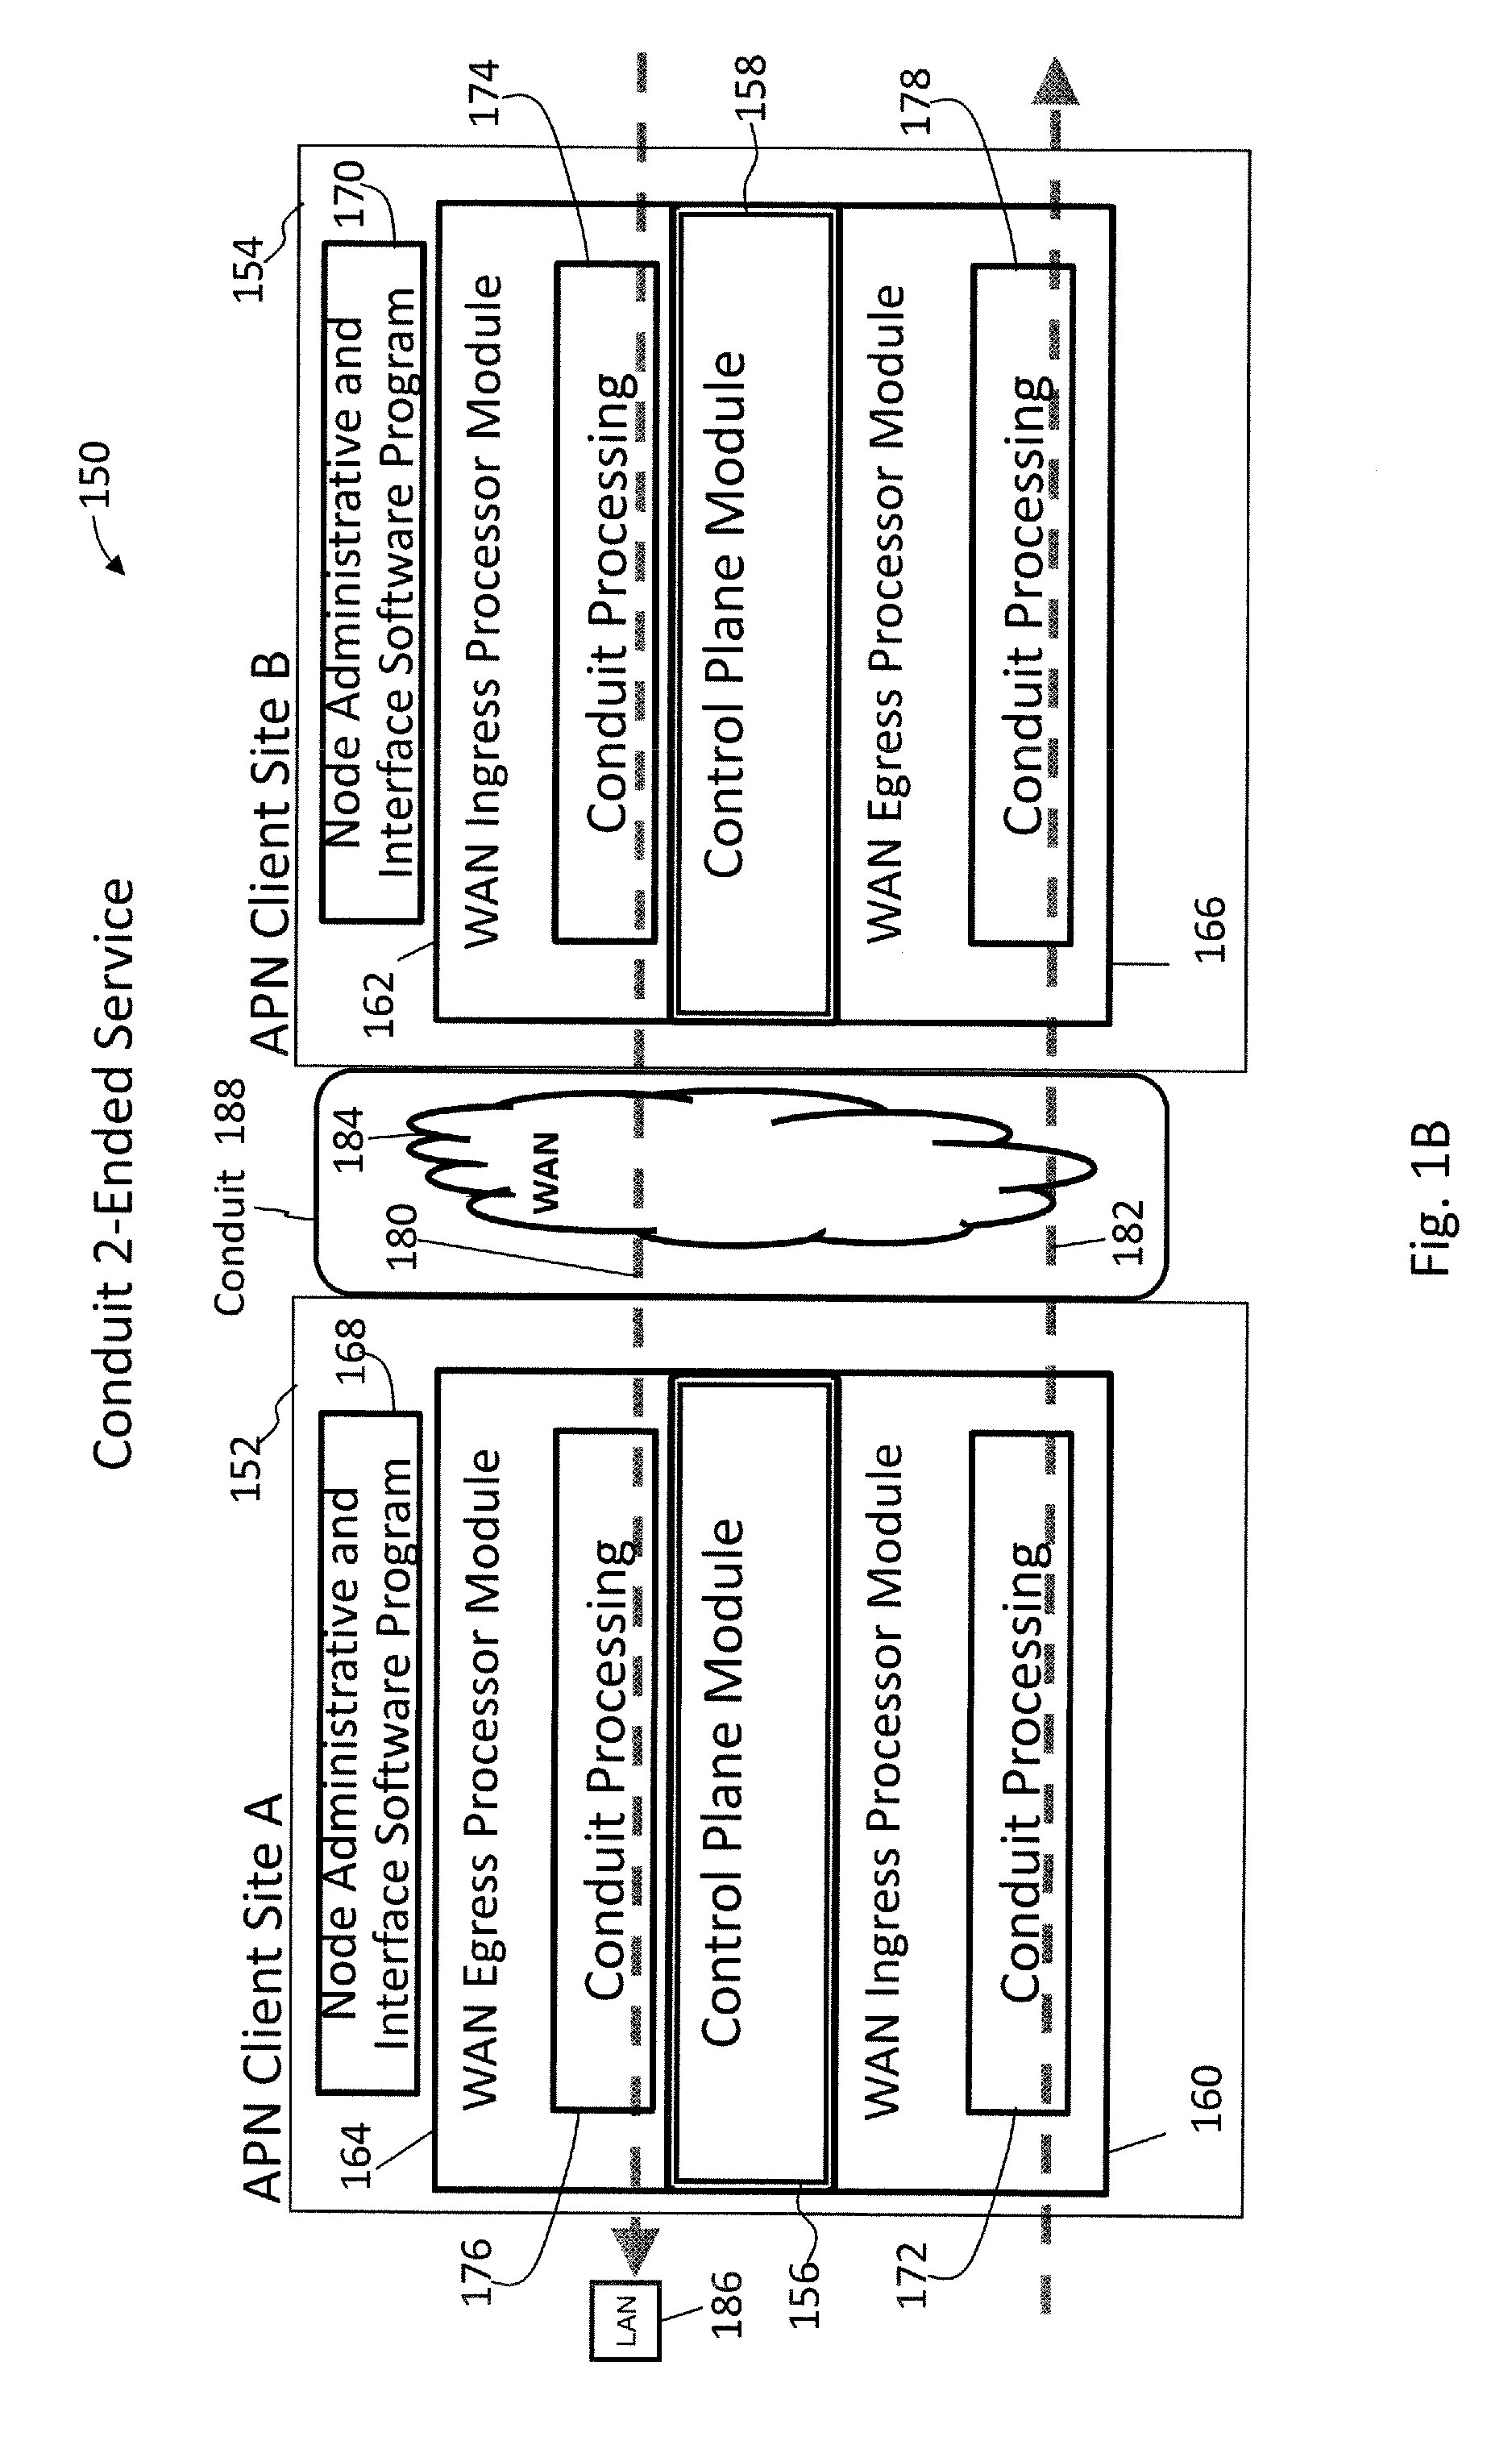 Methods and Apparatus for Providing Adaptive Private Network Database Schema Migration and Management Processes